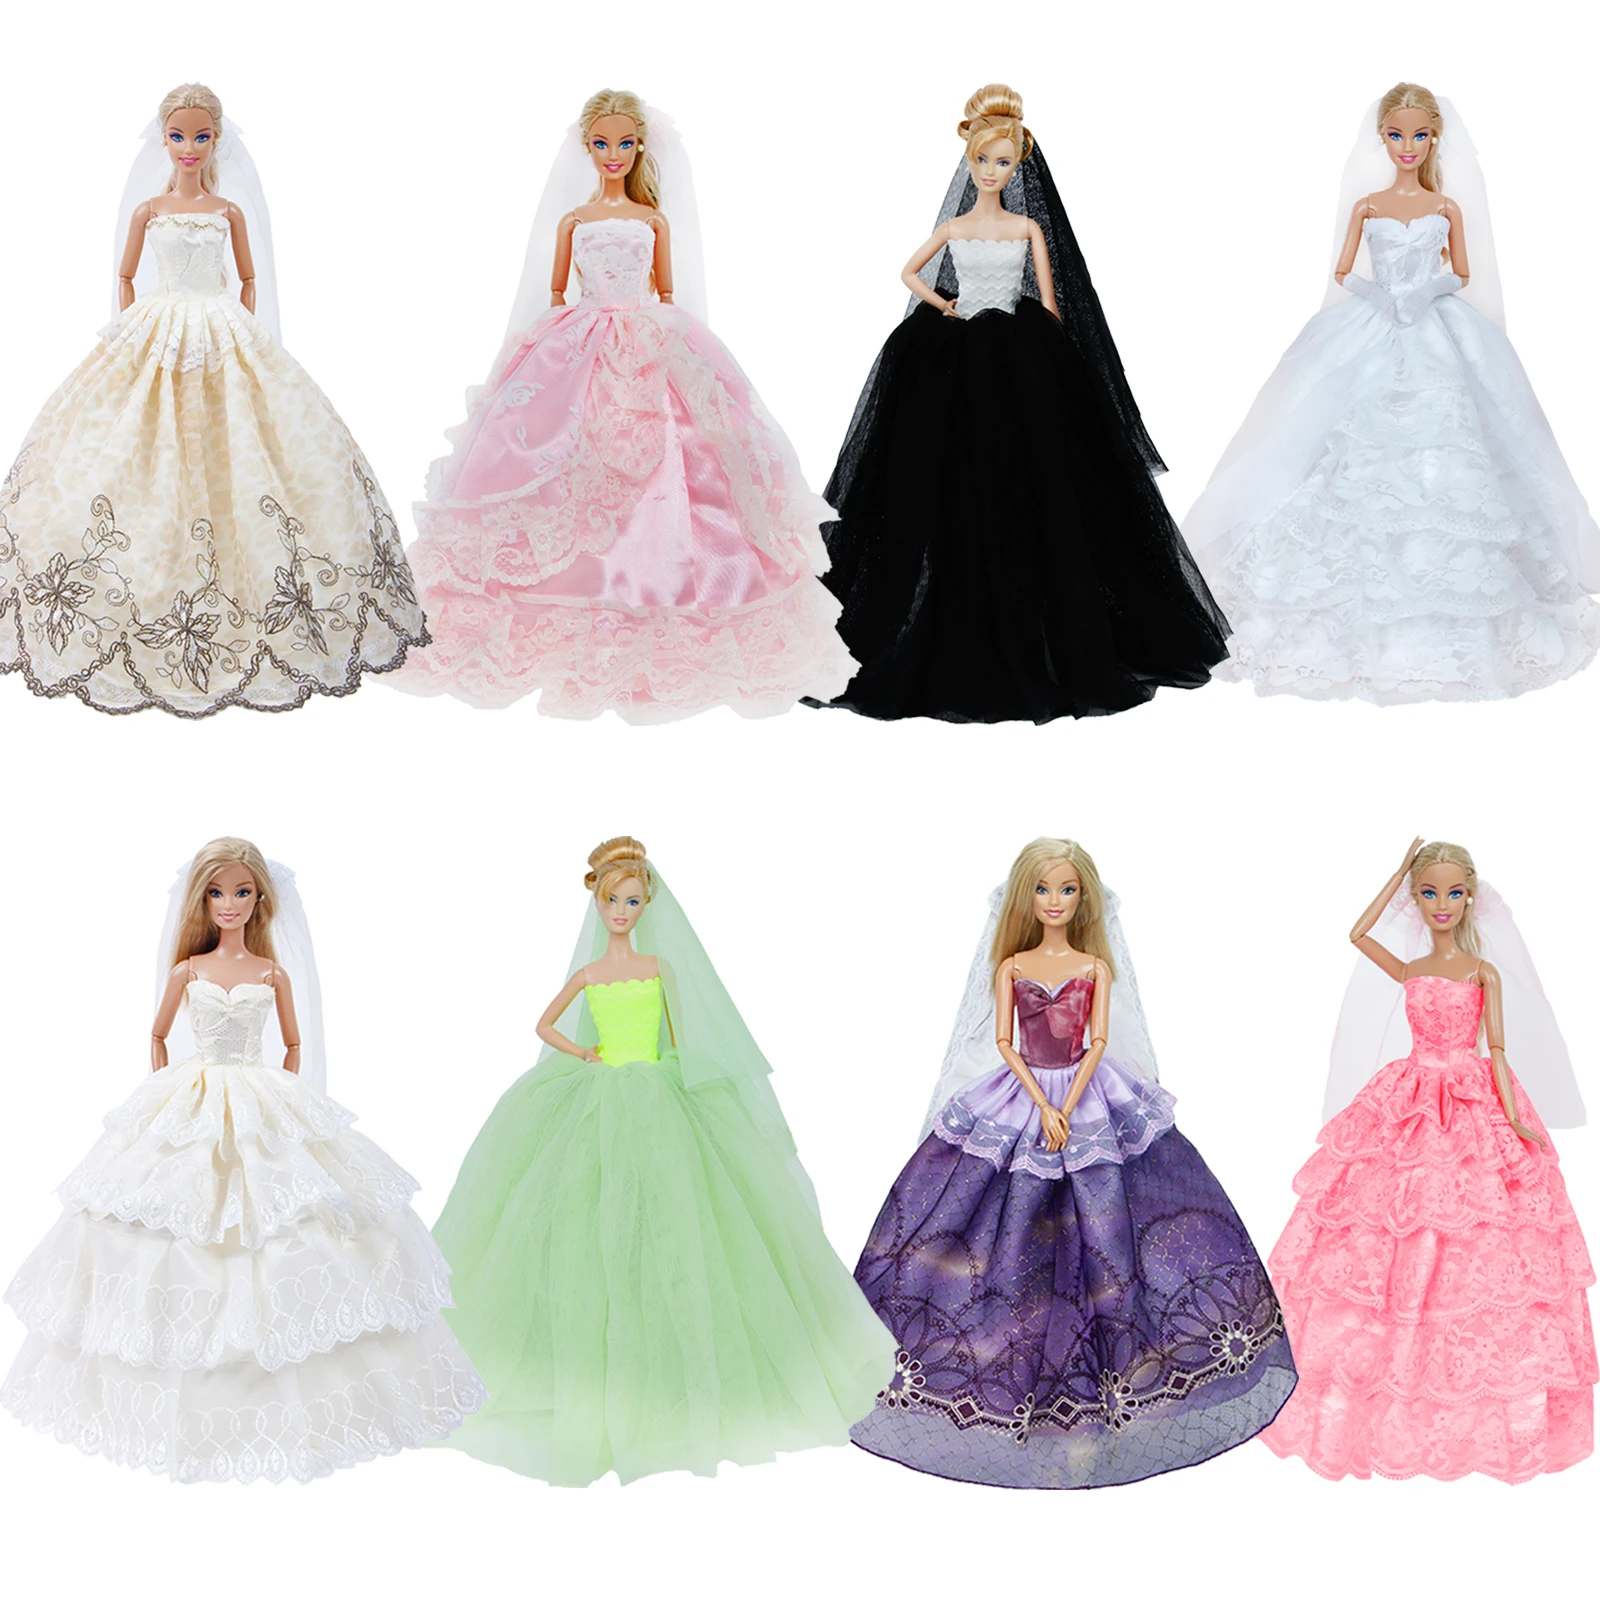 Handmade Fashion Wedding Dress for Barbie Doll Princess Dinner Party Wear Gown + Veil Clothes Outfit Doll Accessories Kids Toy